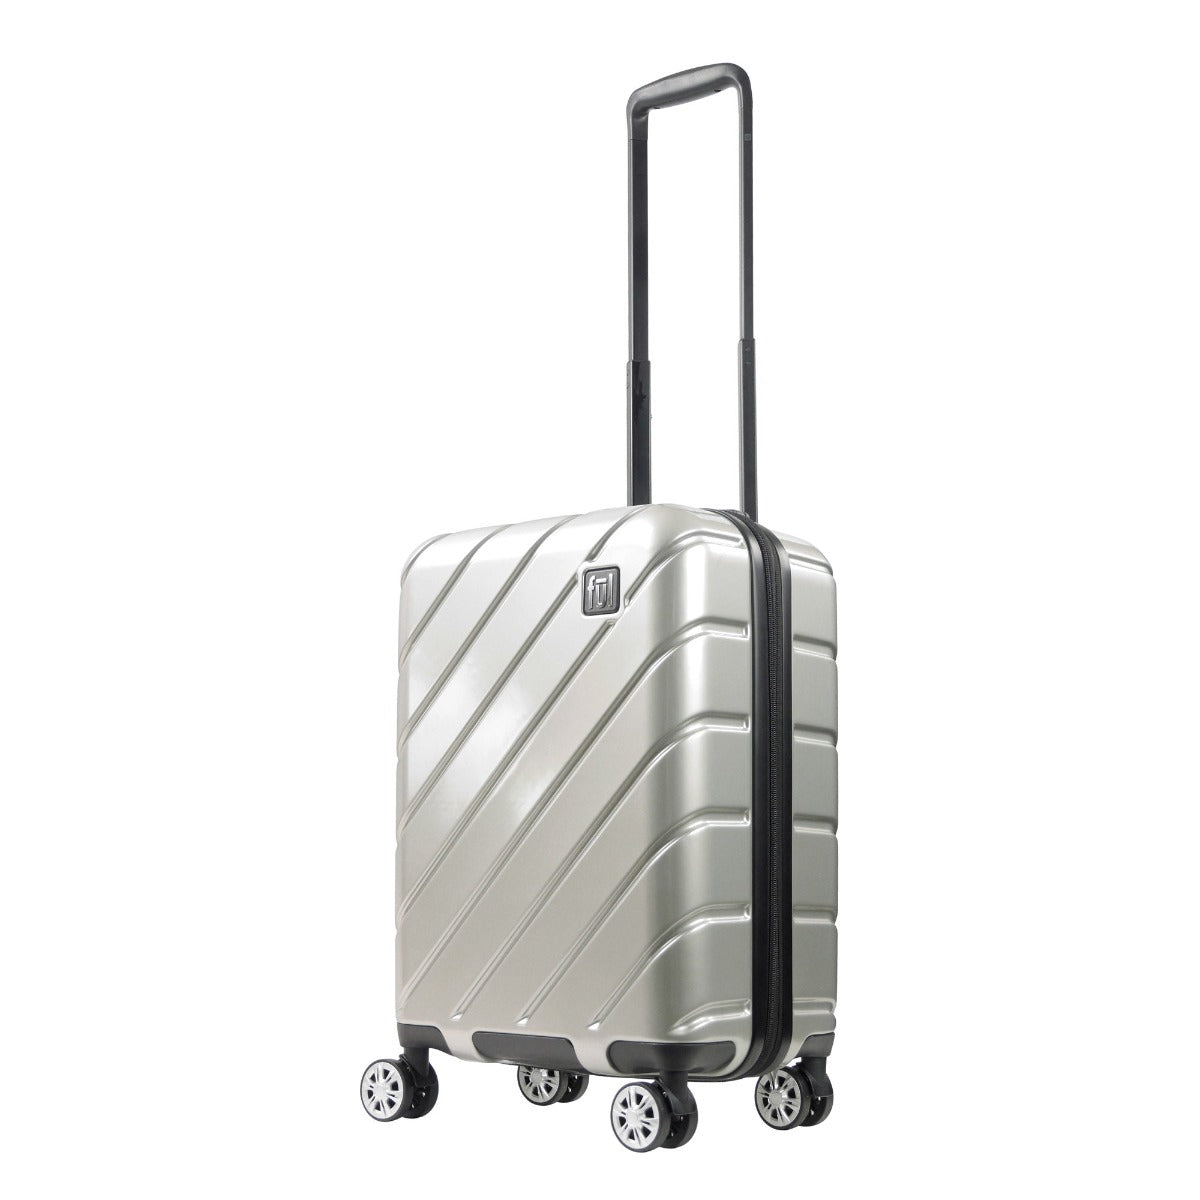 Ful Velocity 22" carry-on hardside spinner suitcase silver luggage